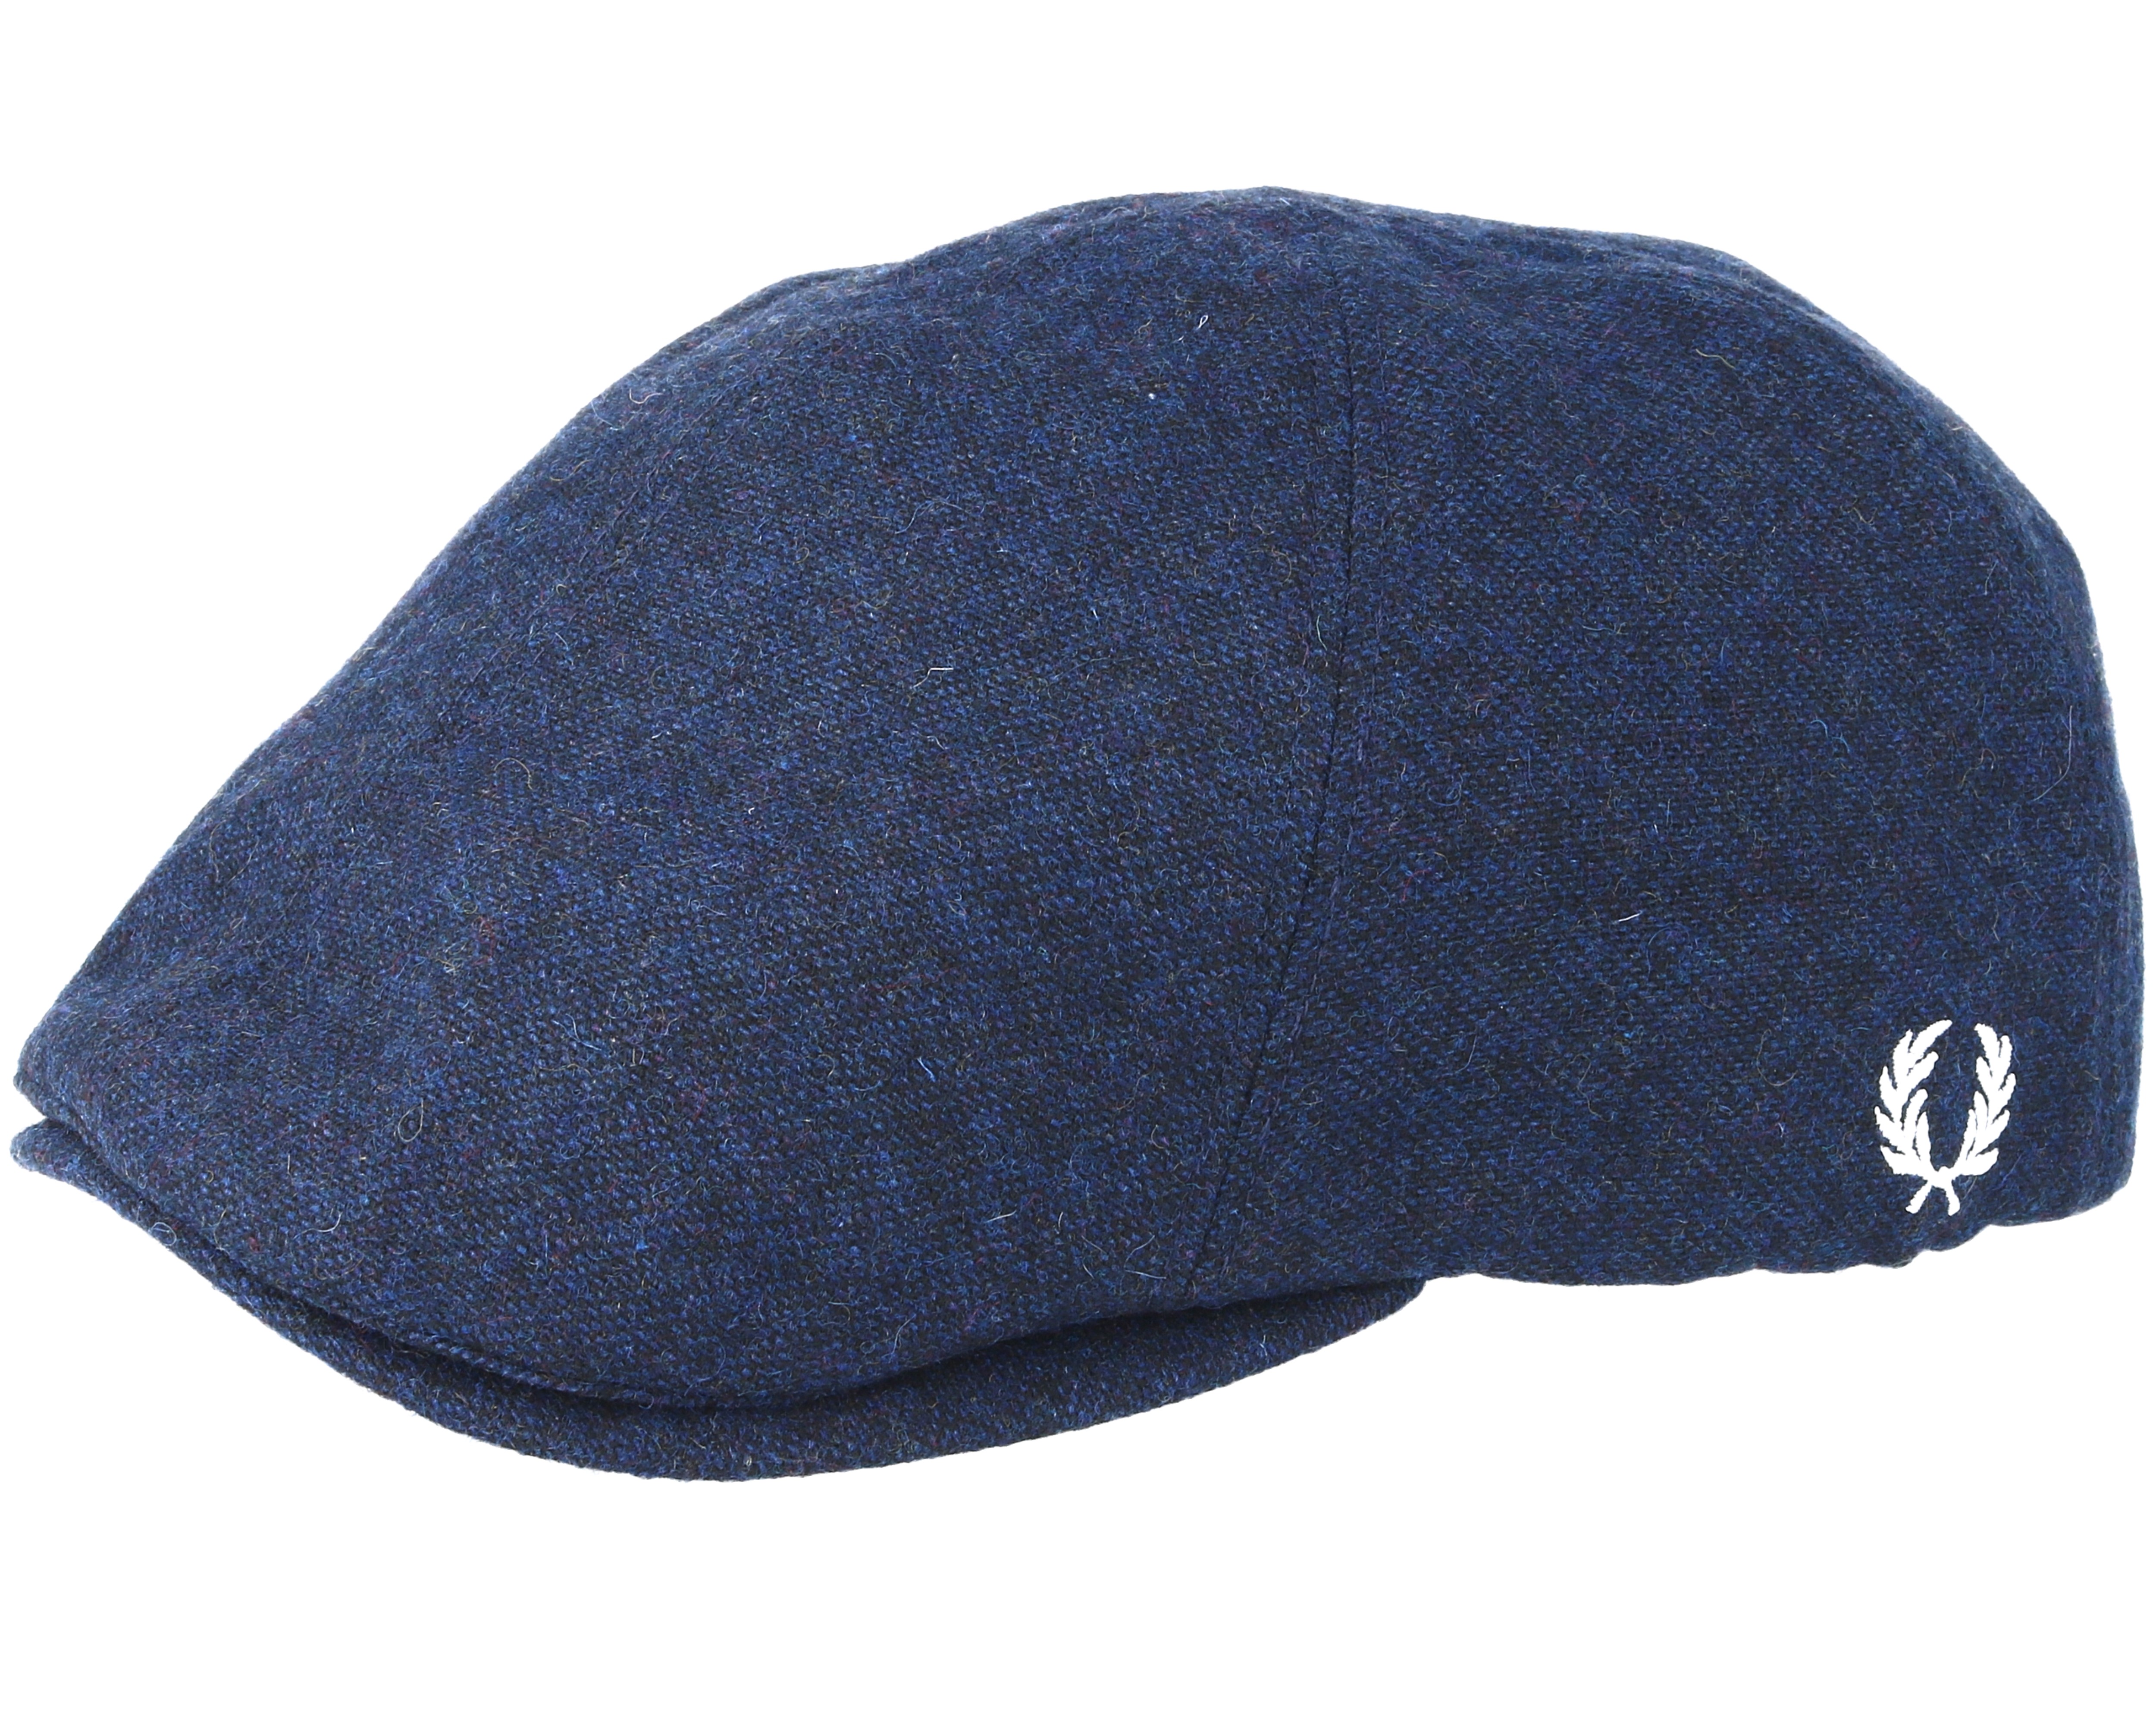 Boiled Navy Flat Cap - Fred Perry Cap | Hatstore.be